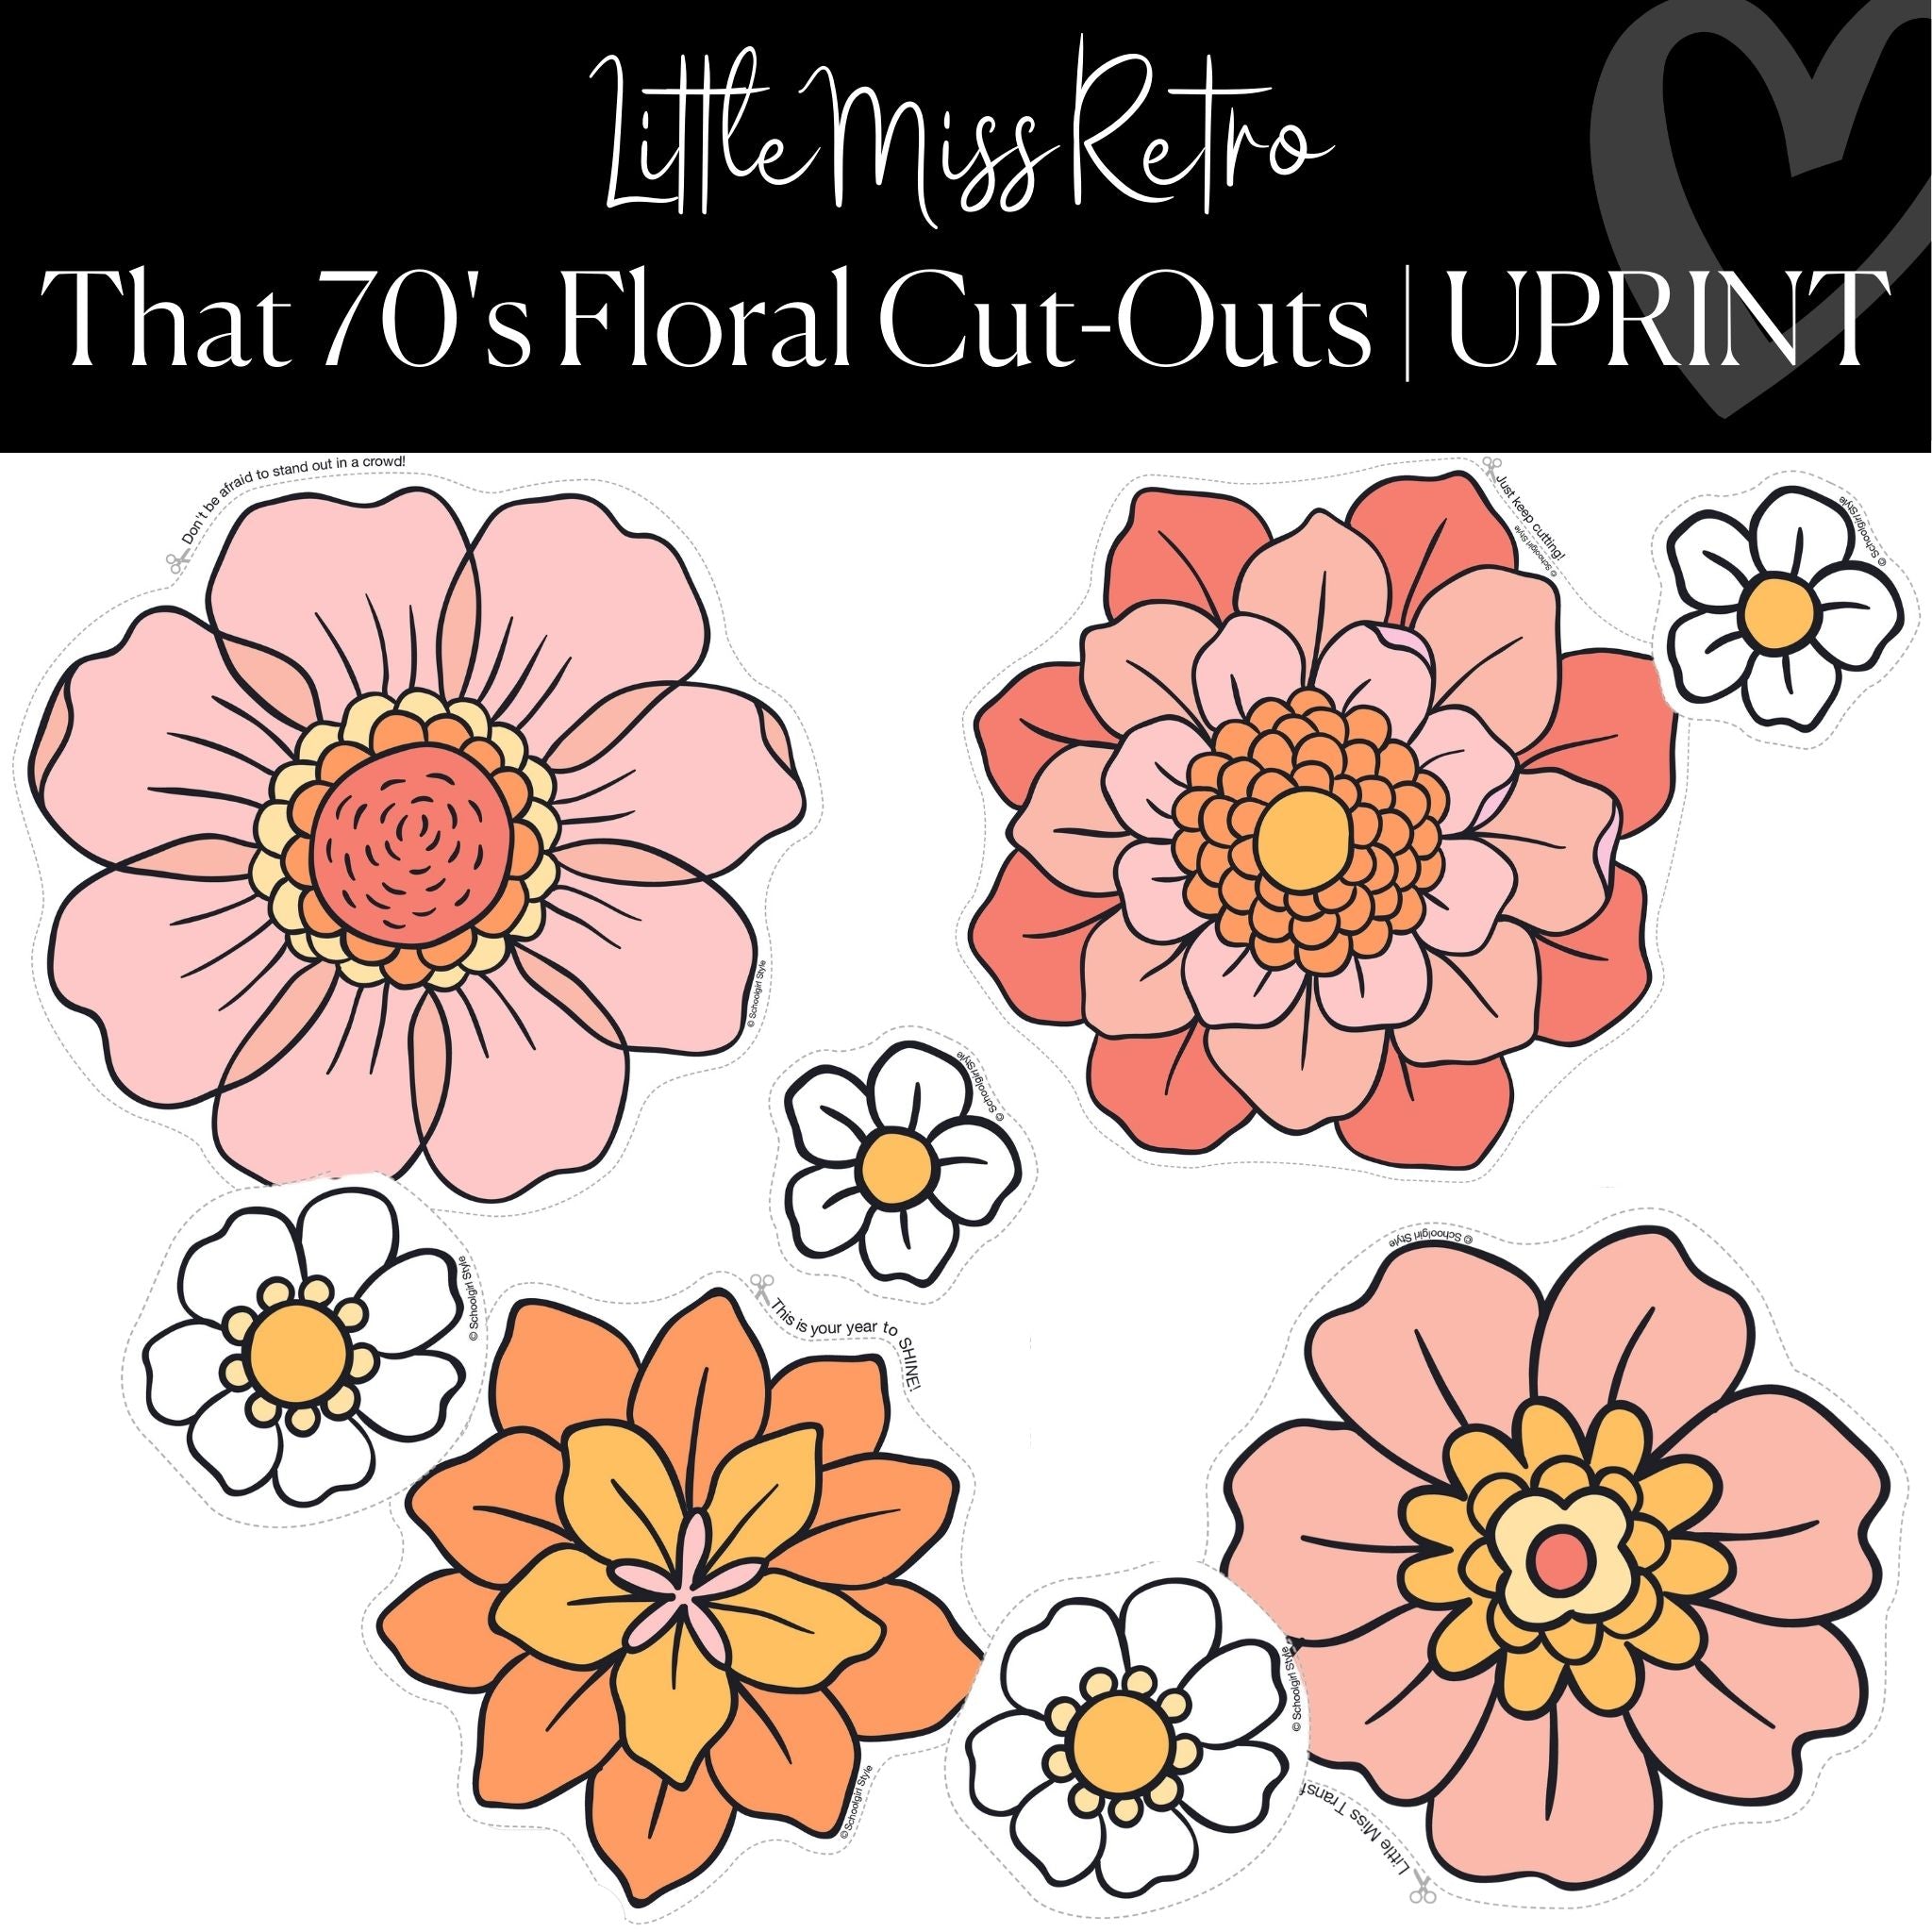 XL Floral Cut-Outs | Coral Floral | UPRINT | Schoolgirl Style